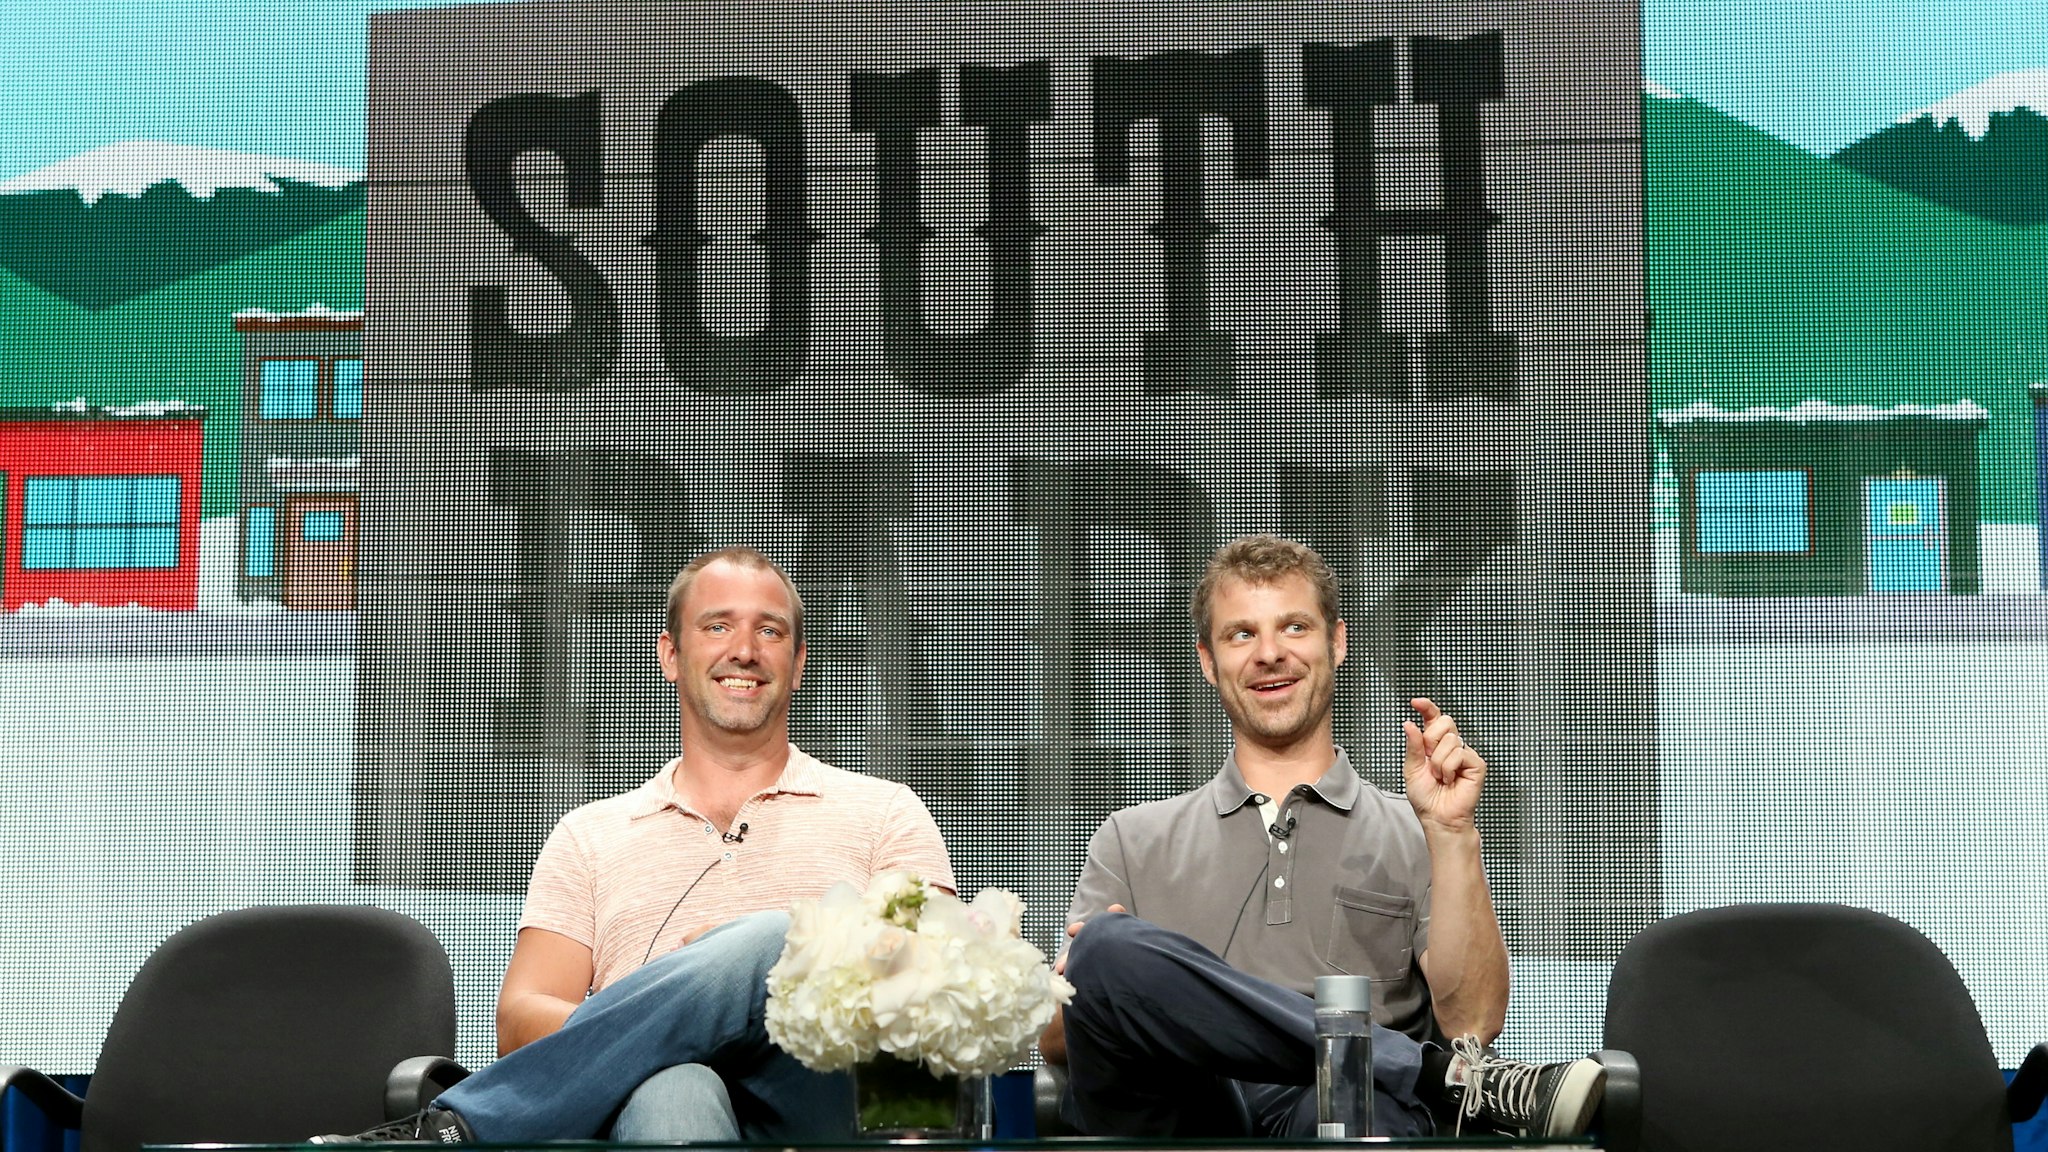 Writer/creators Trey Parker (L) and Matt Stone speak onstage during the 'South Park' panel at Hulu's TCA Presentation at The Beverly Hilton Hotel on July 12, 2014 in Beverly Hills, California.